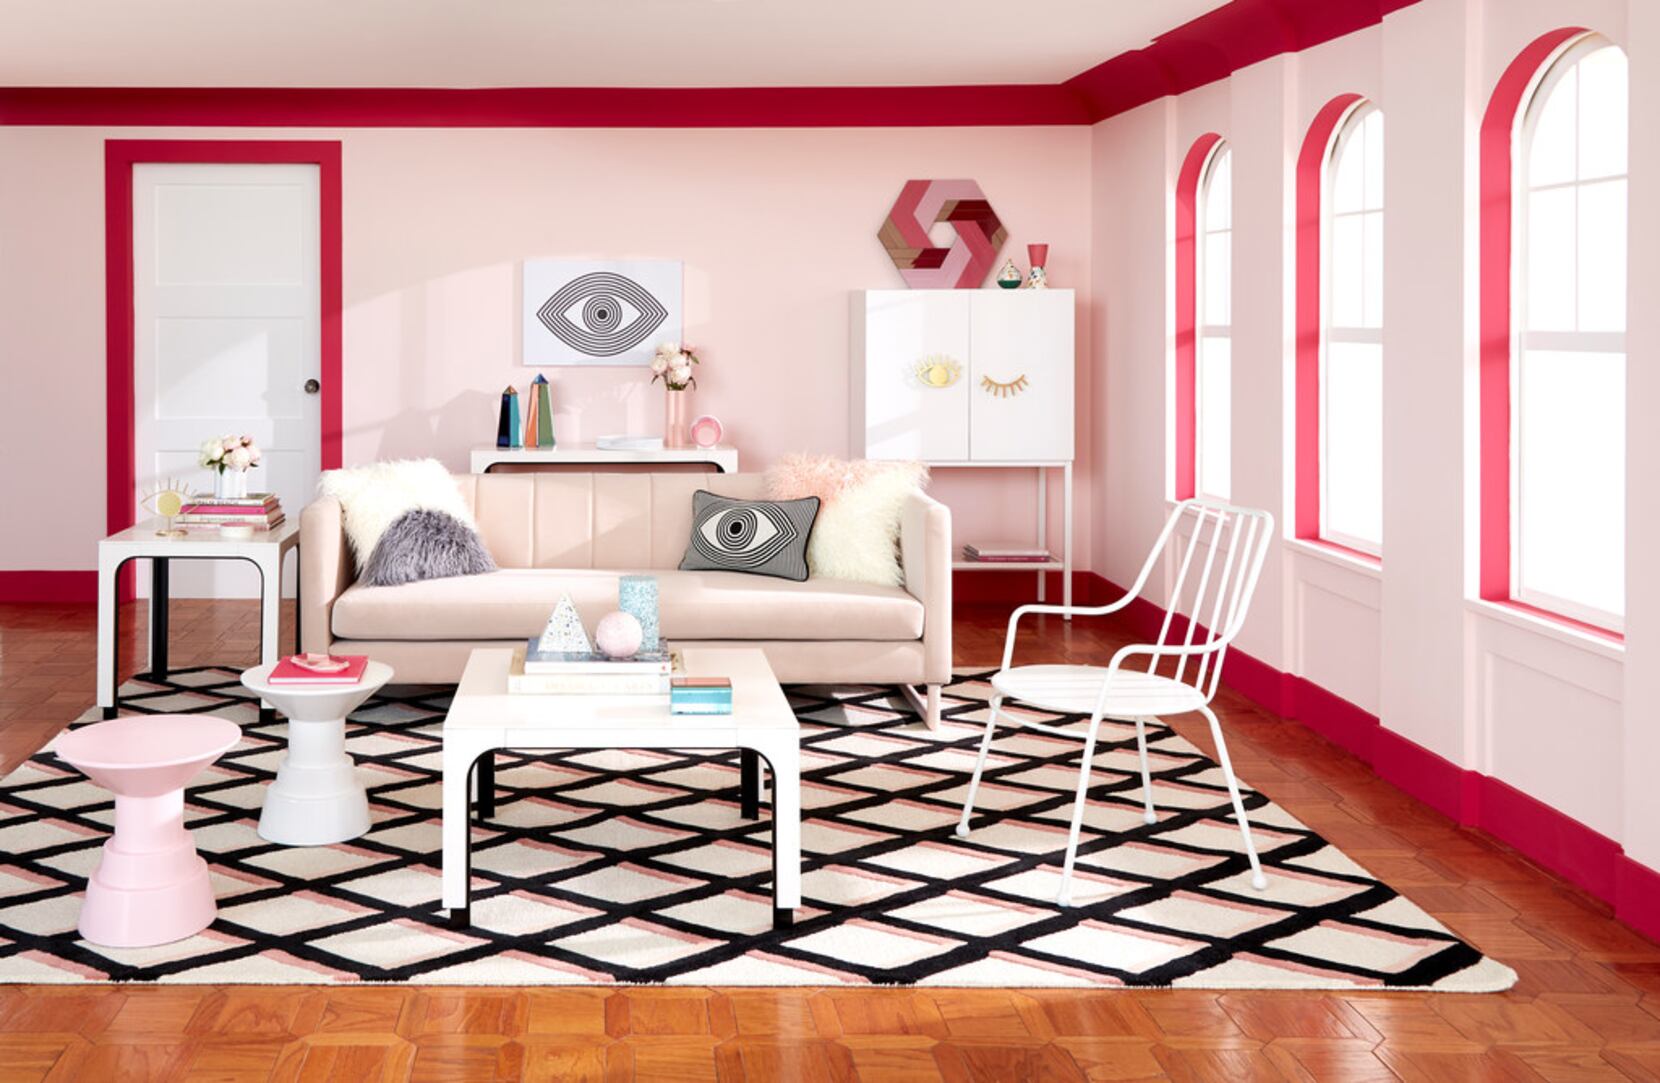 Jonathan Adler adds his happy, chic — and affordable — style to  in a  new collection